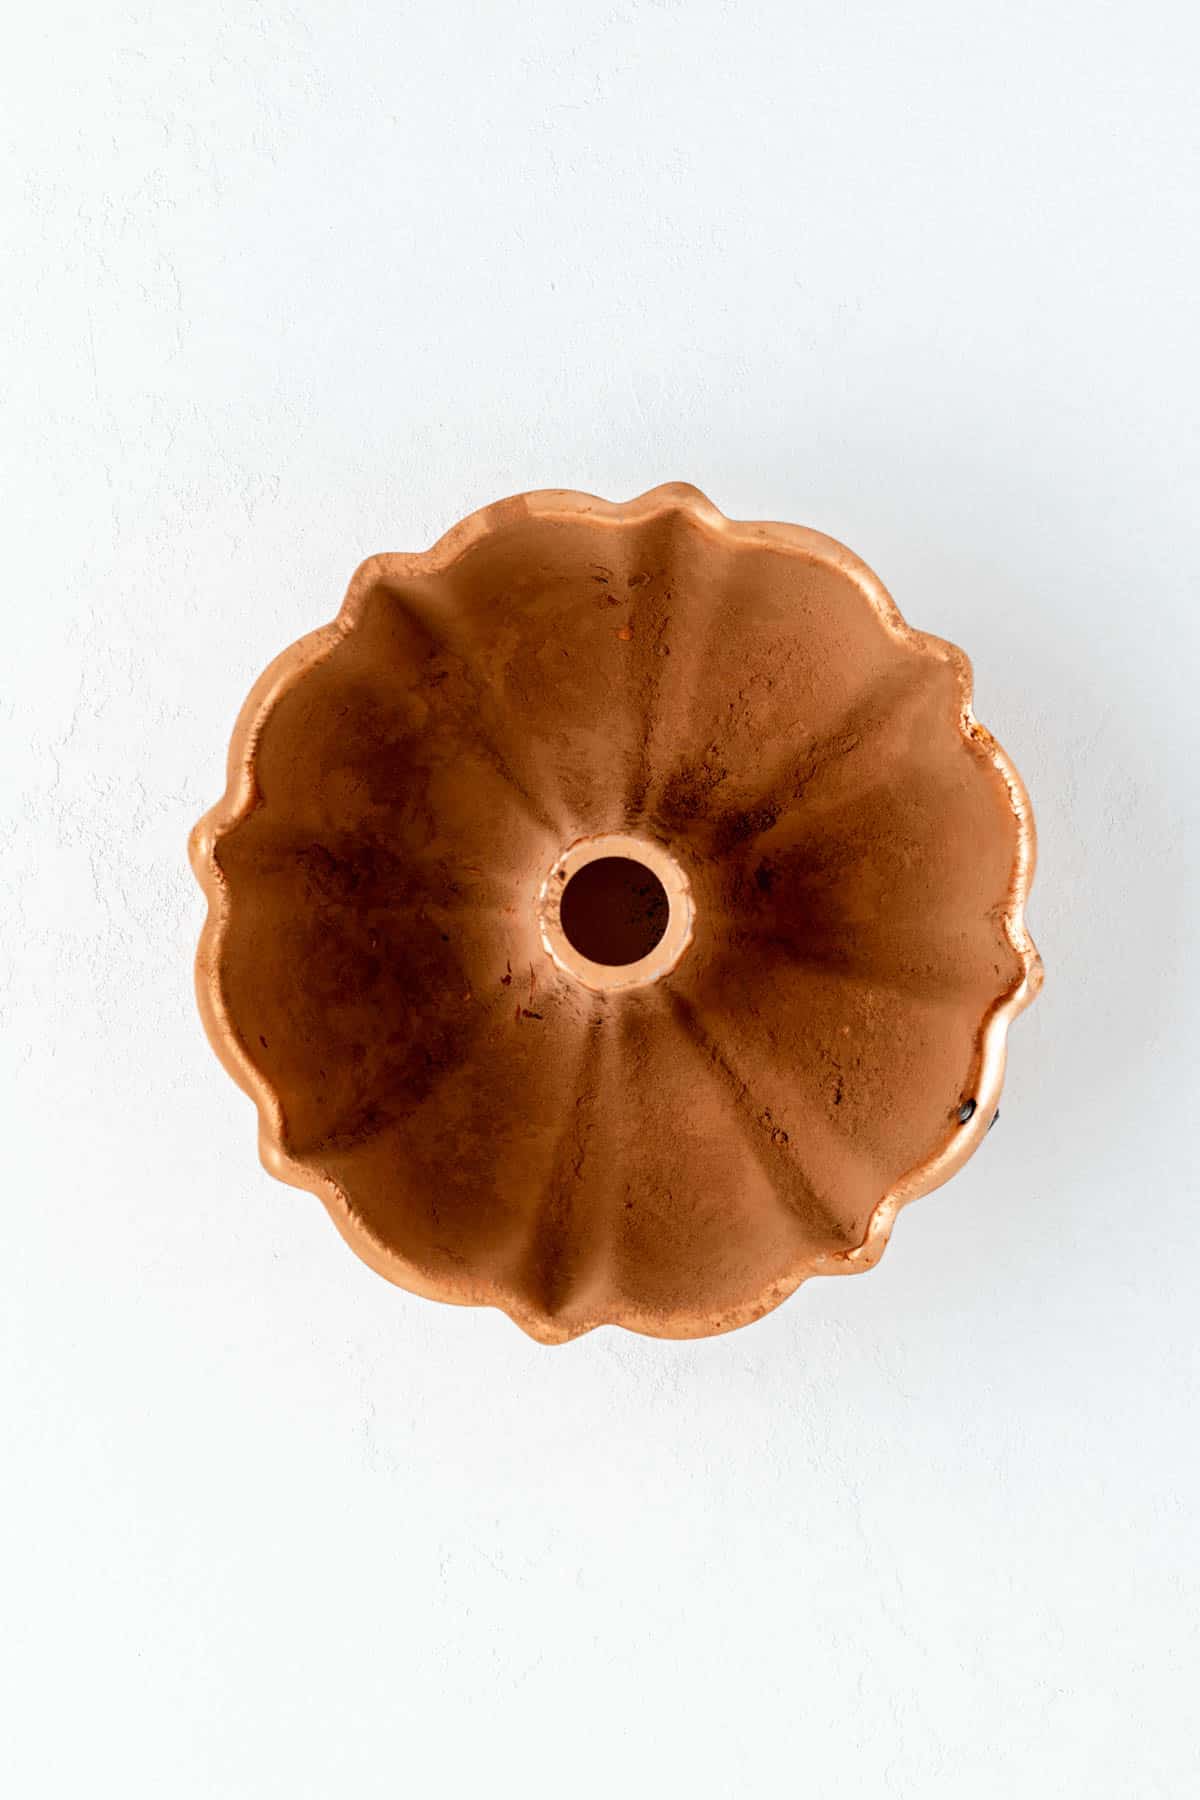 Copper Bundt pan dusted in cocoa powder on white background.